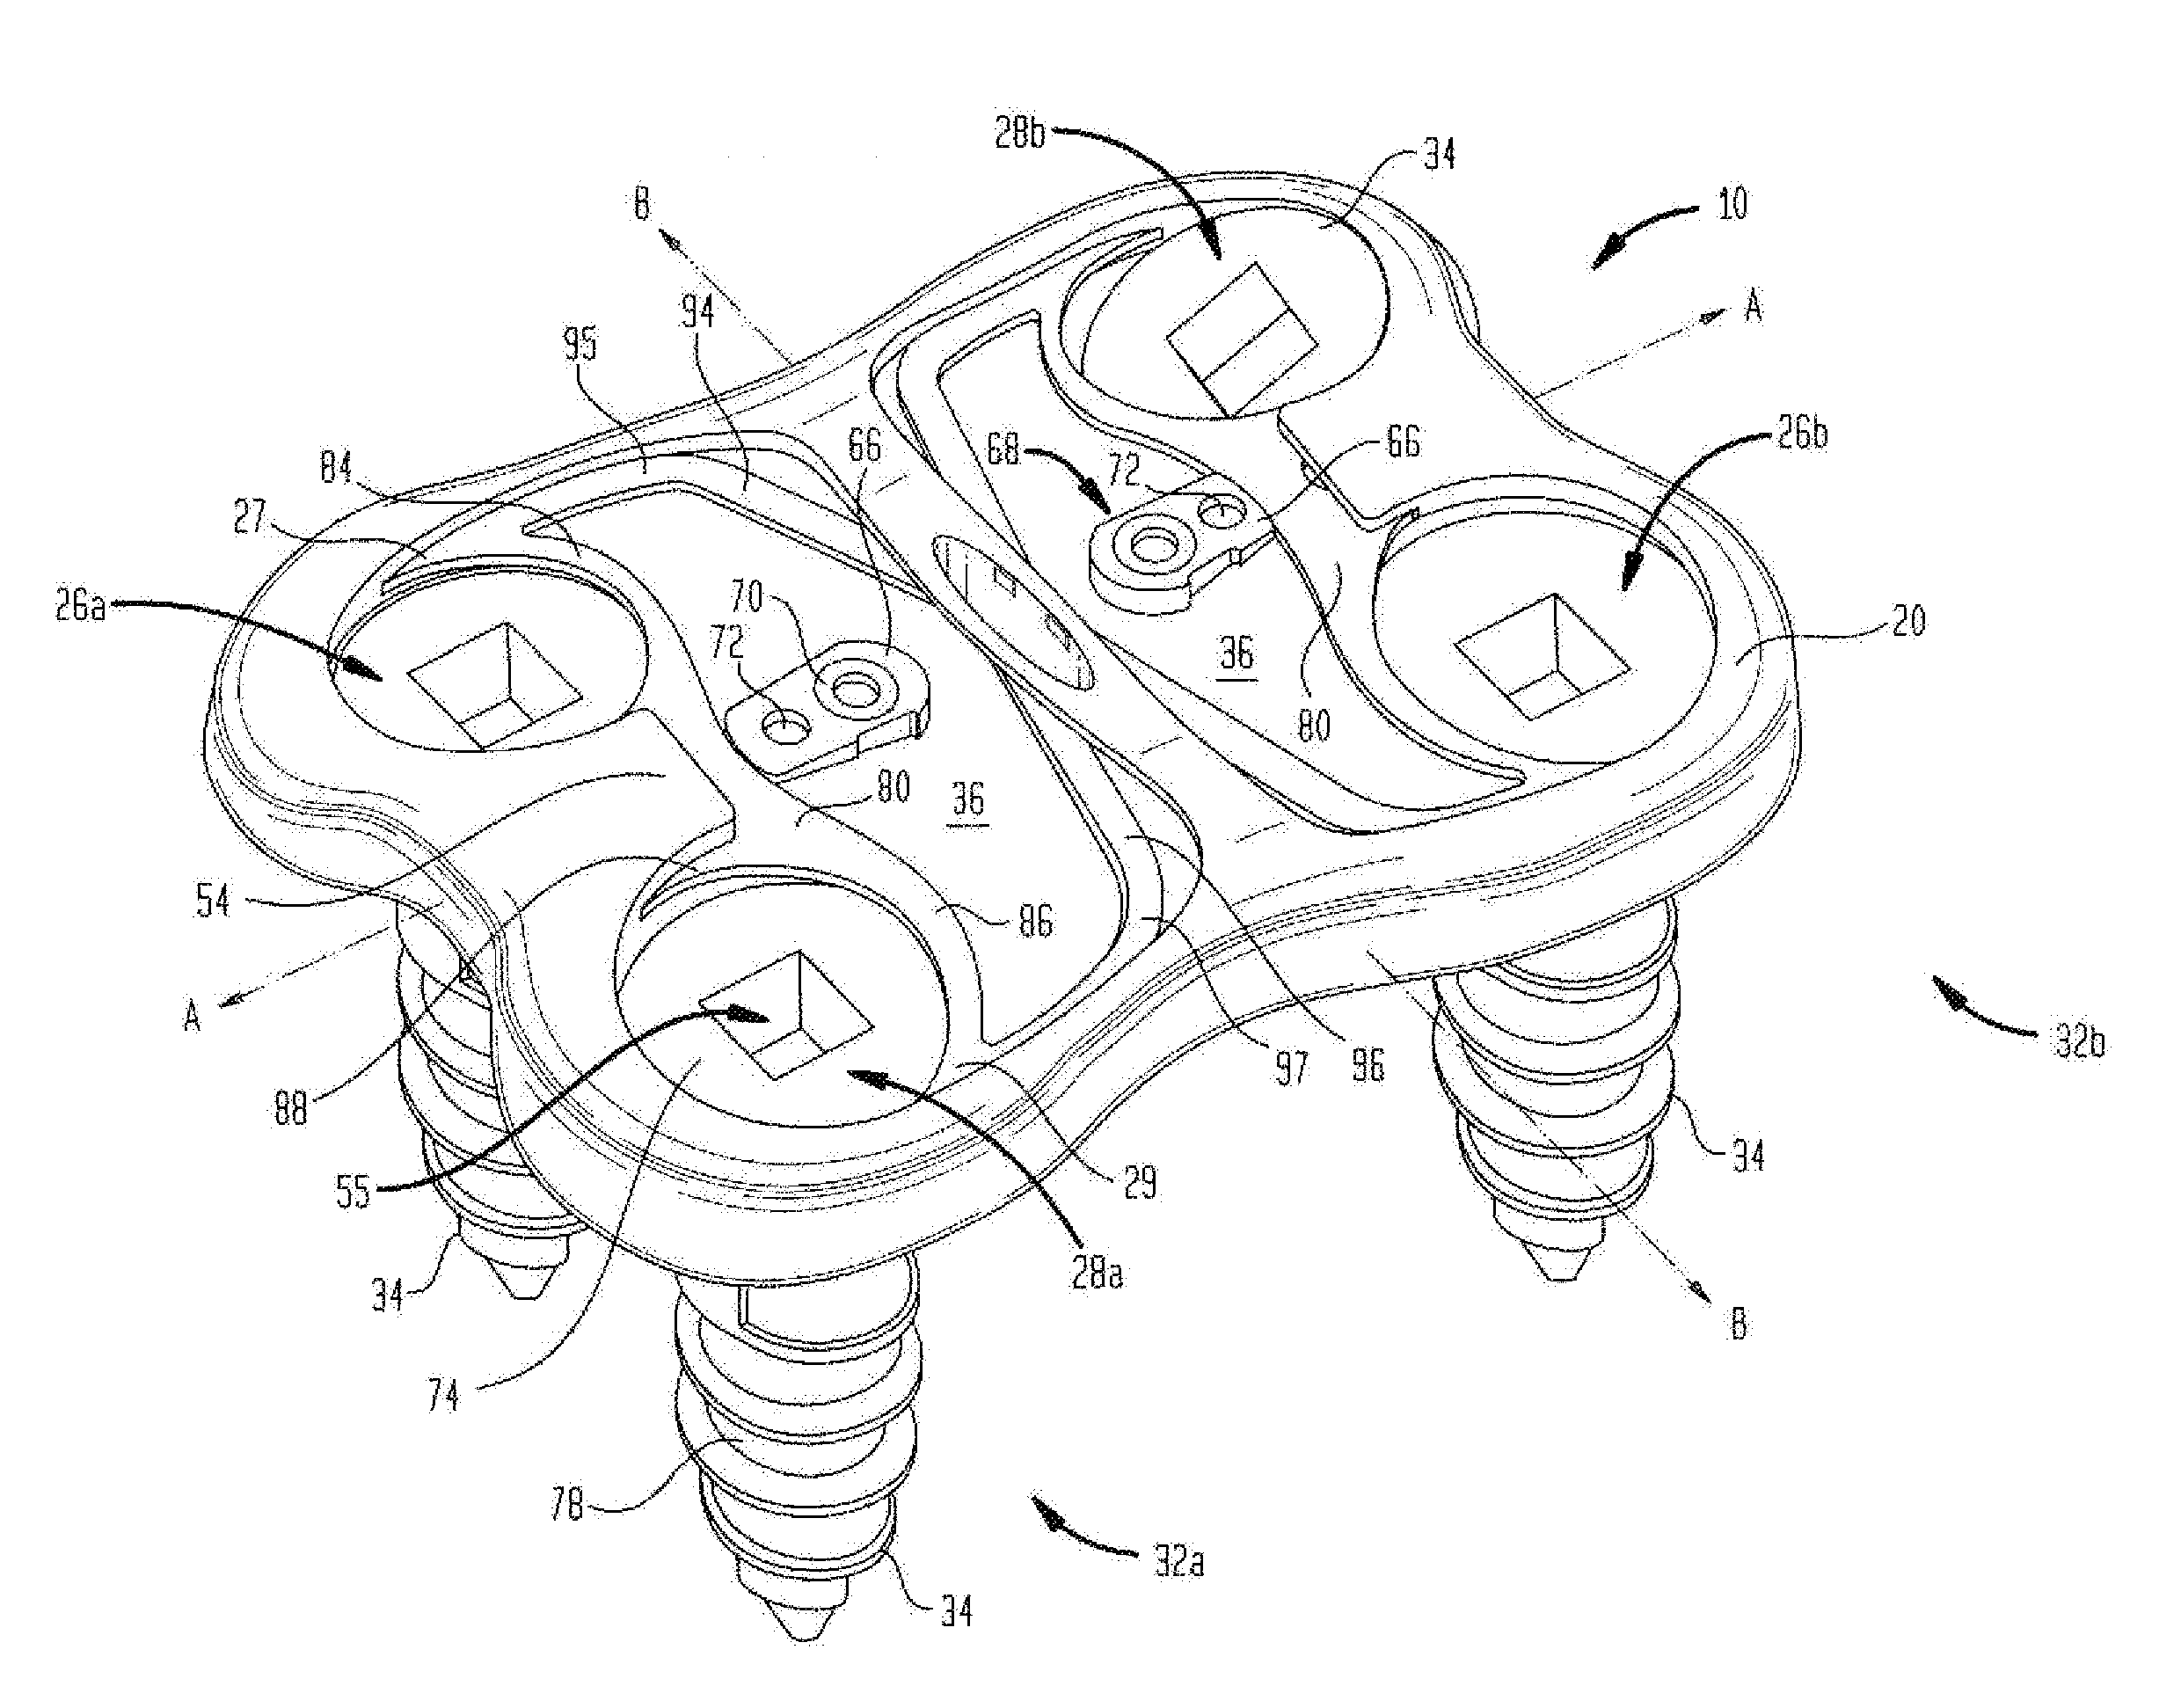 Cervical plate with a feedback device for selective association with bone screw blocking mechanism